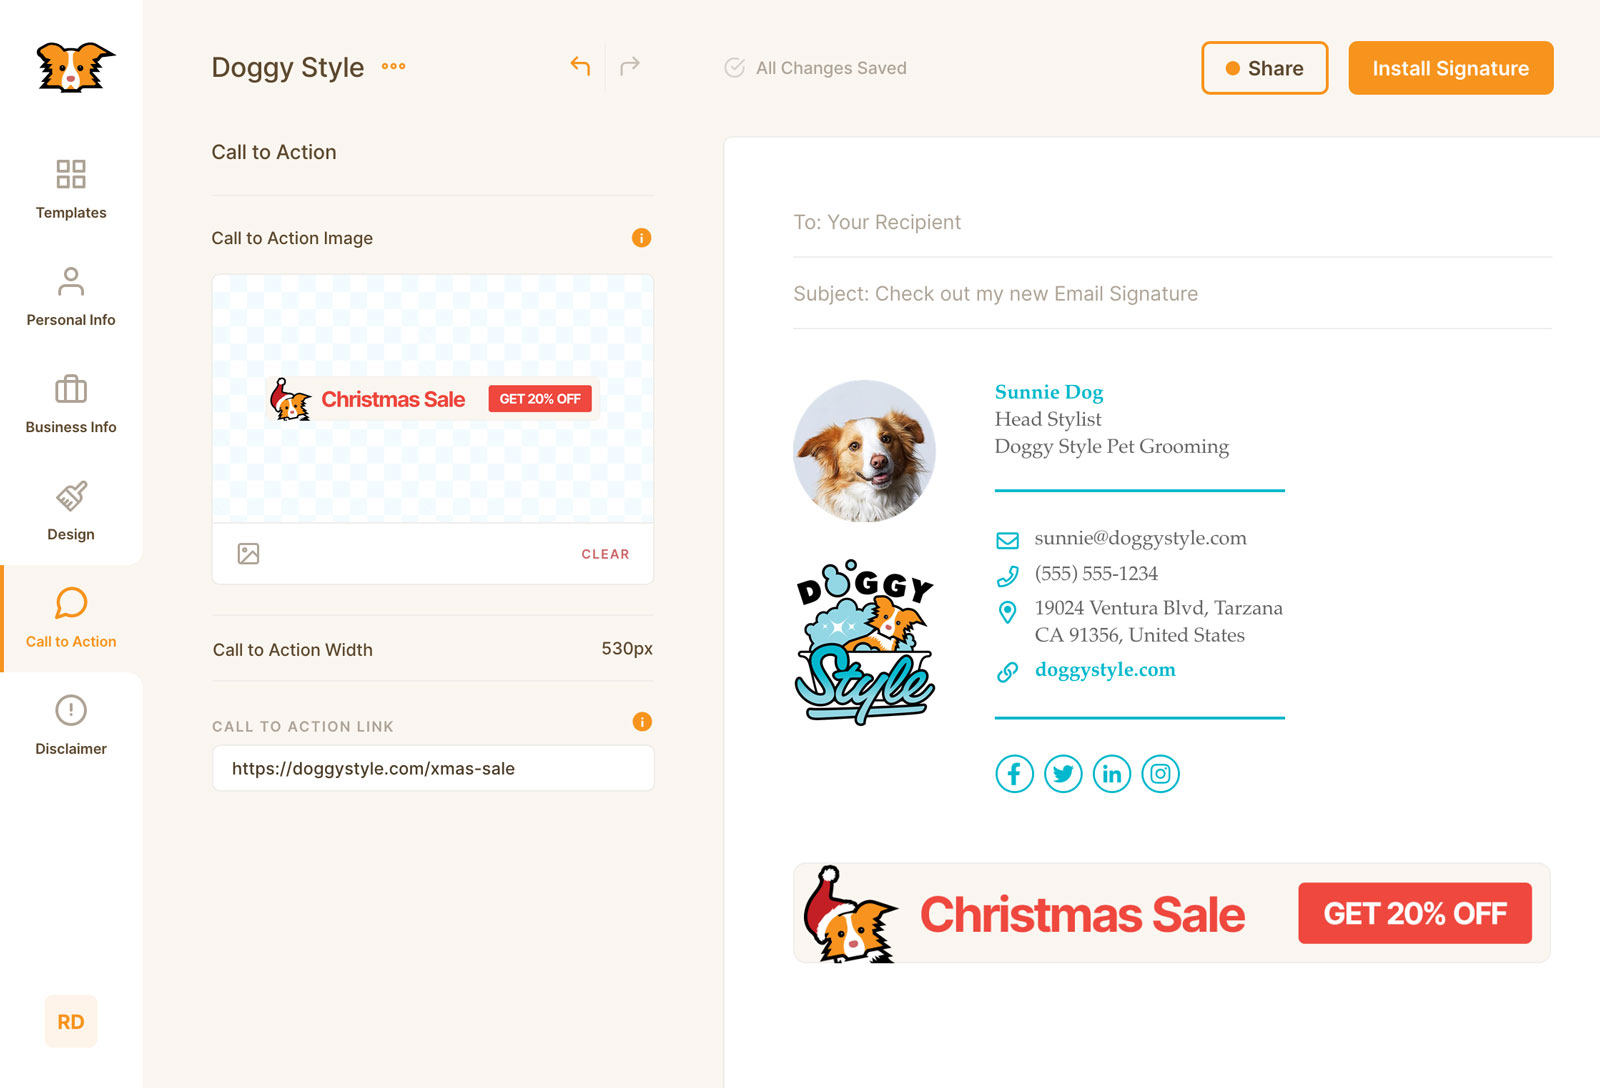 Screenshot of siganture with Christmas sale call to action image